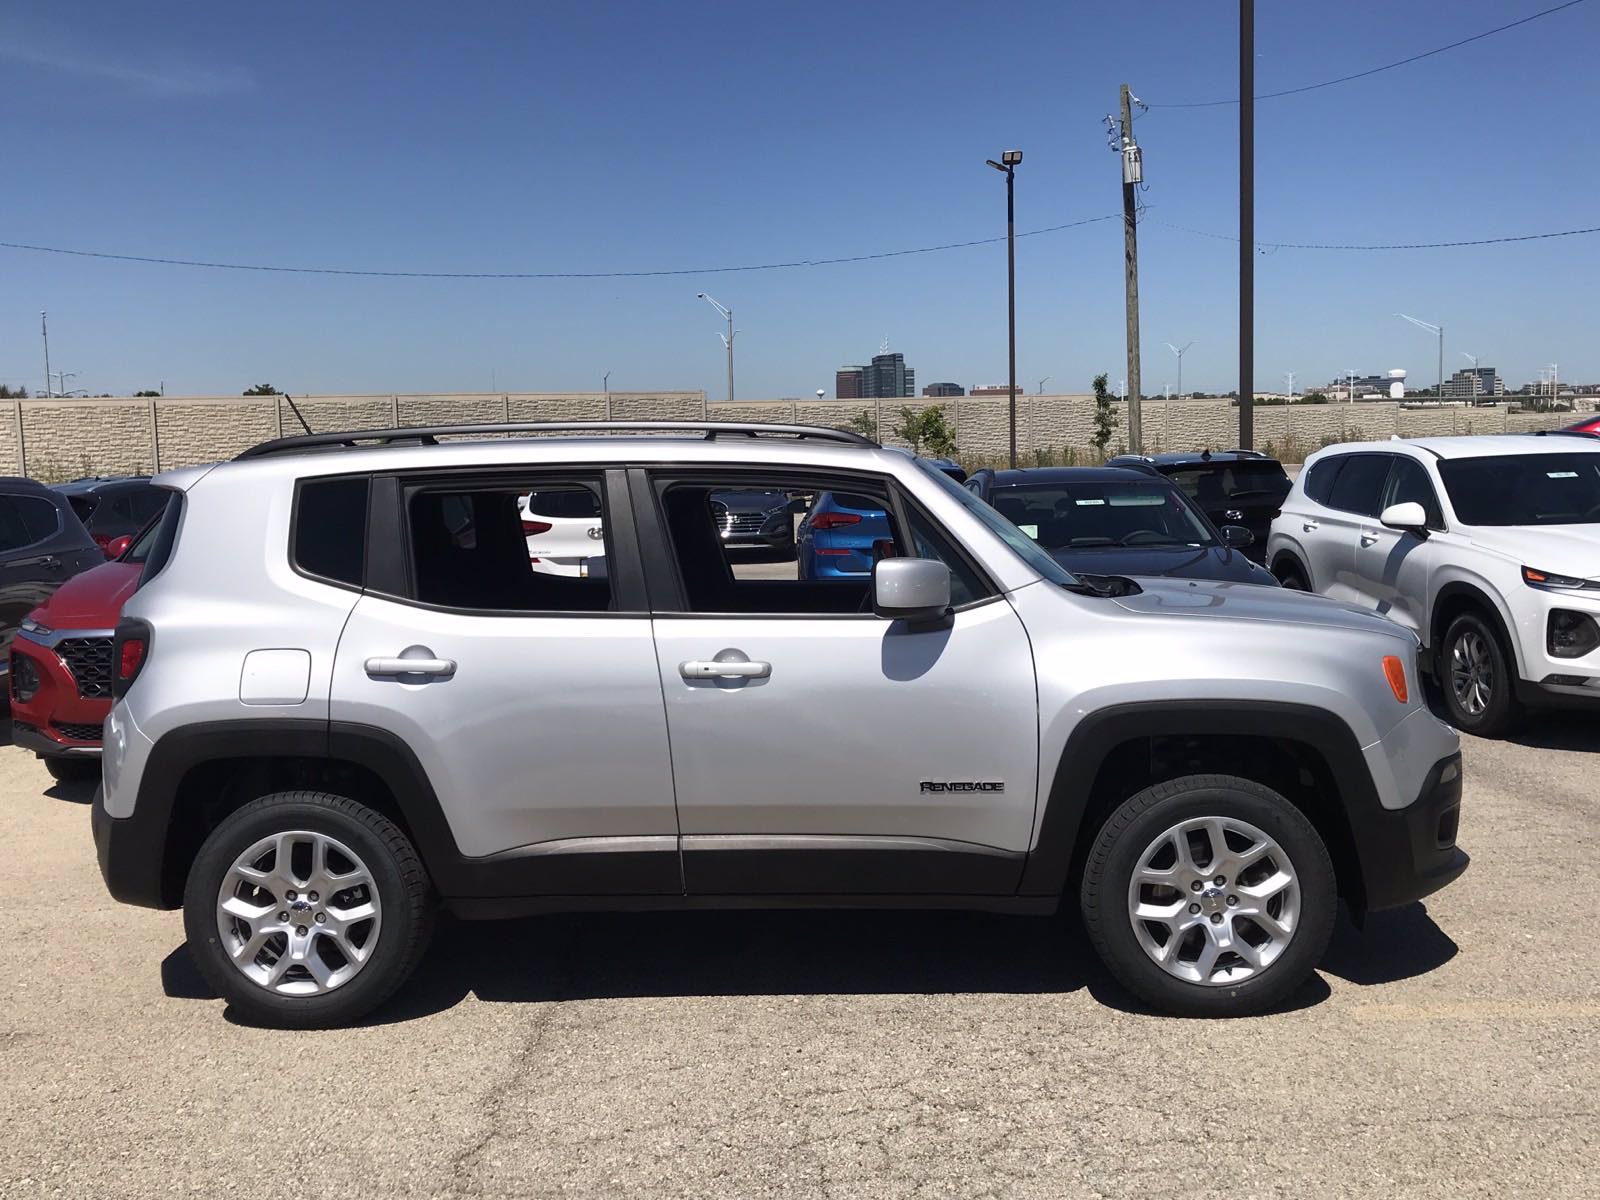 PreOwned 2017 Jeep Renegade Latitude 4WD Sport Utility